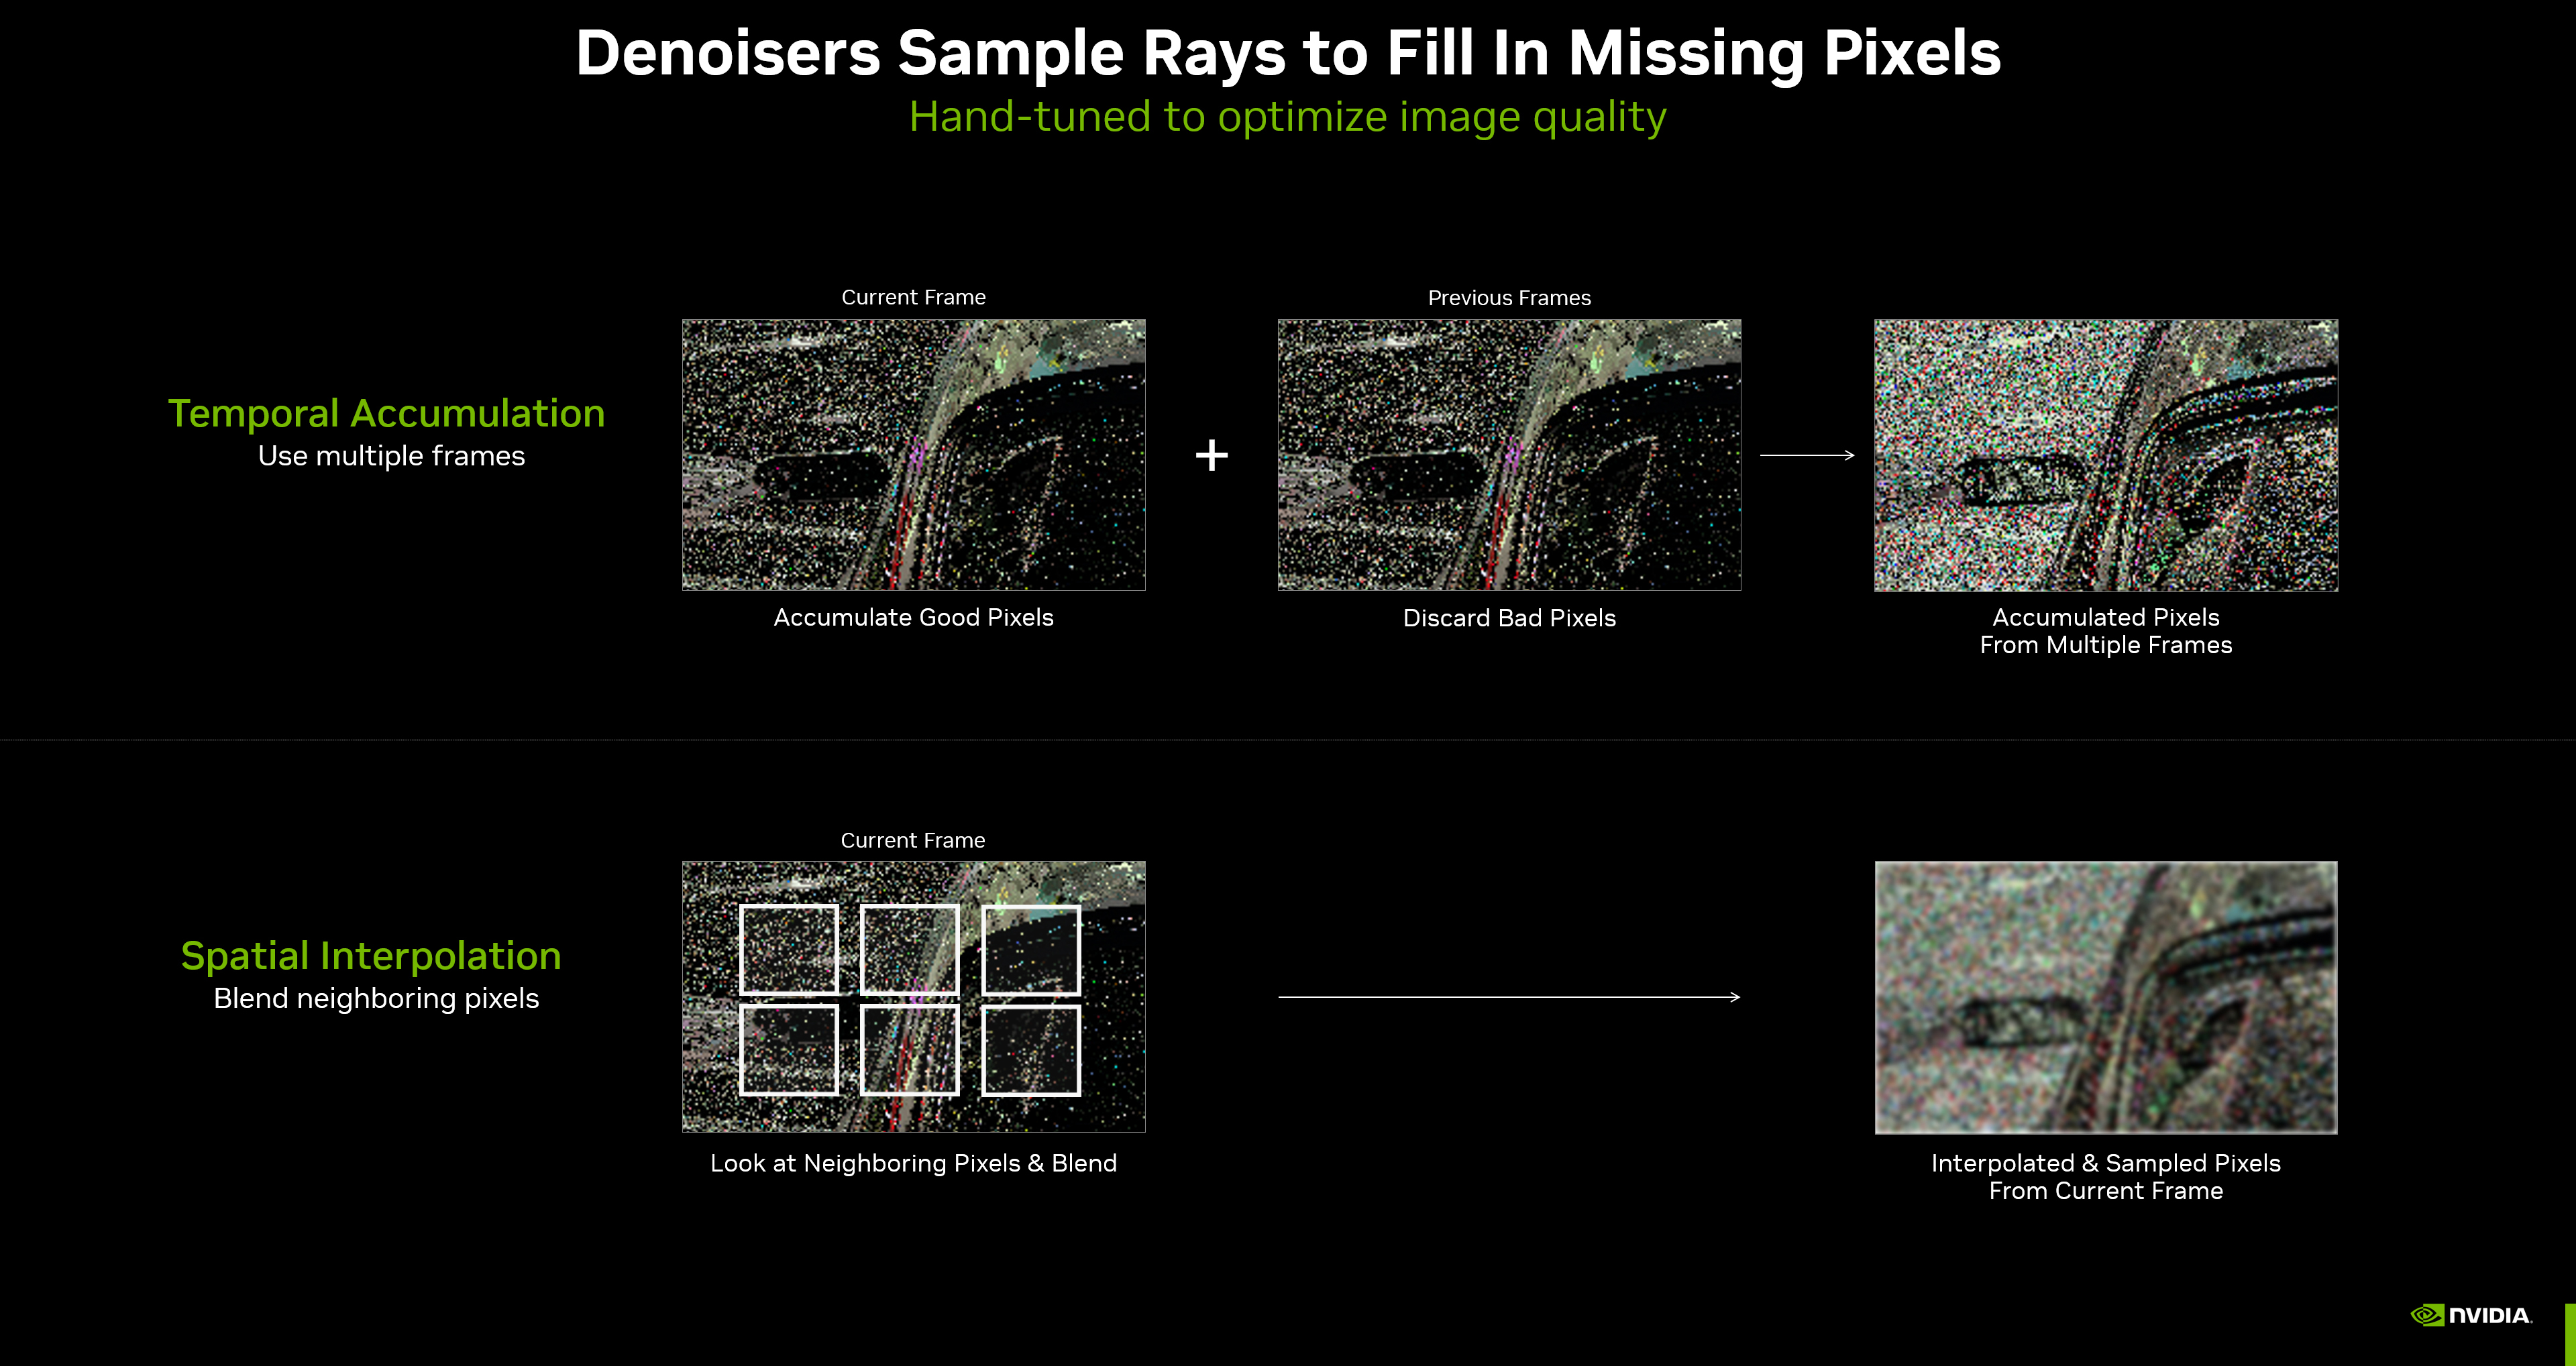 https://images.nvidia.com/aem-dam/Solutions/geforce/news/gamescom-ct0037/denoisers-sample-rays-to-fill-in-missing-pixels.jpg